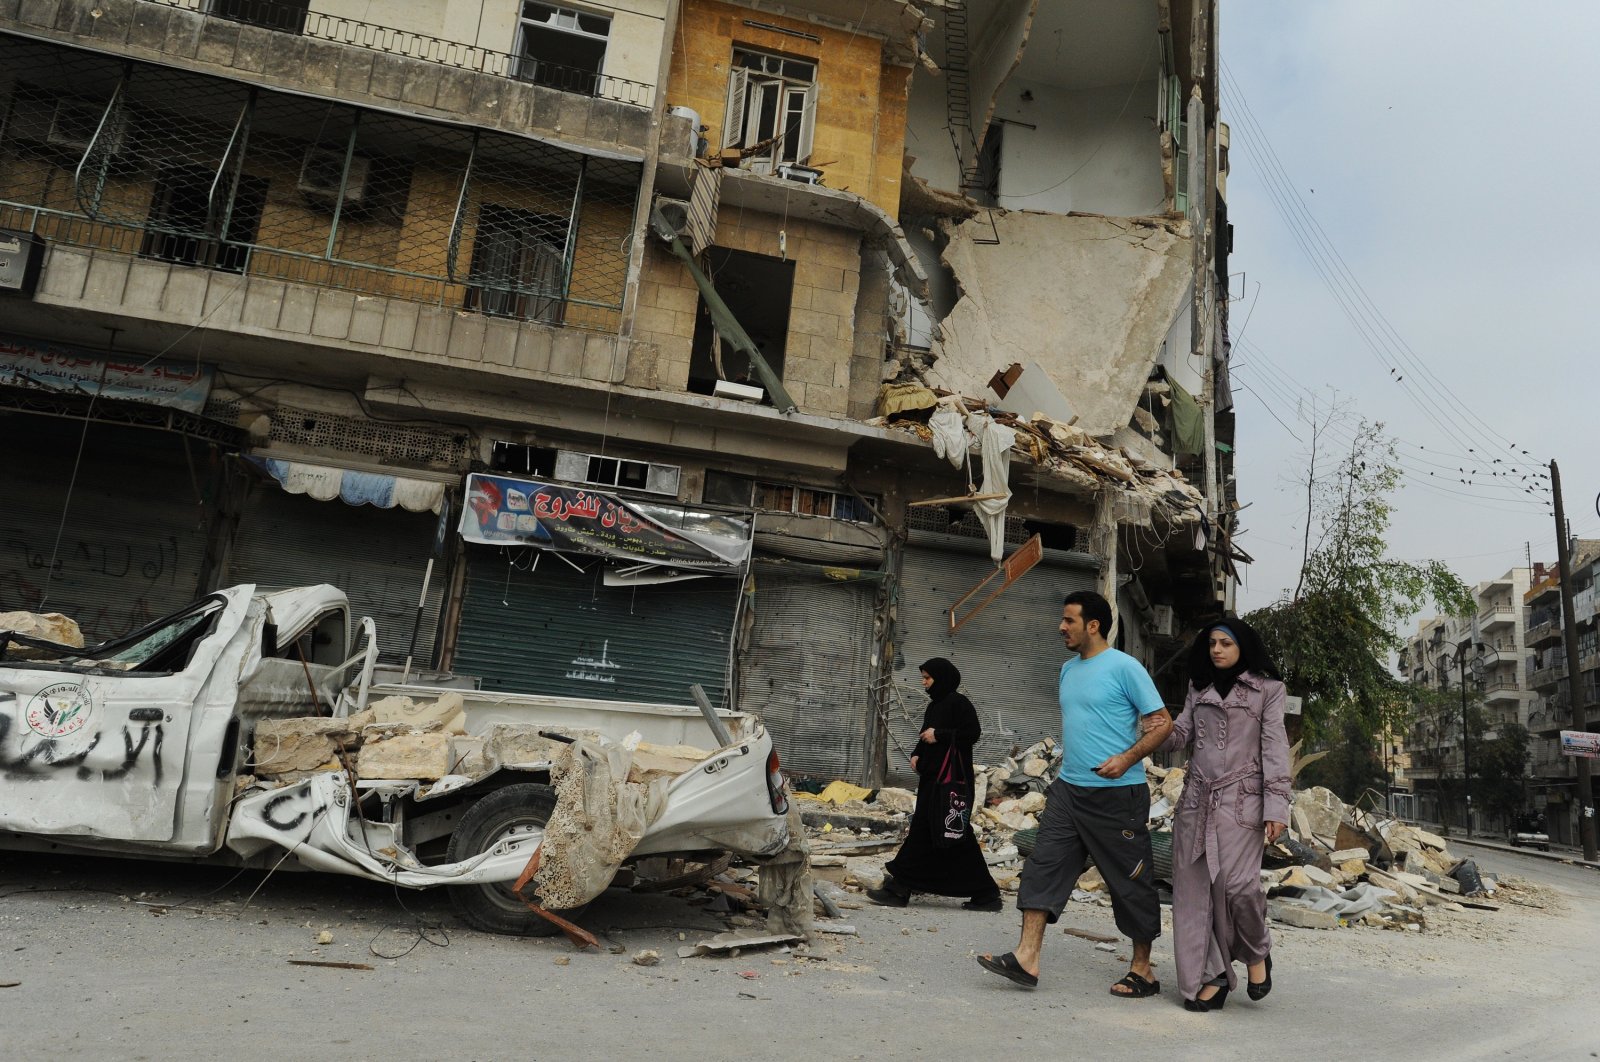 Syrians walk past a destroyed vehicle as they come to terms with massive destruction from regime air and artillery bombardment in Aleppo, Syria, Oct. 23, 2012. (Getty Images)